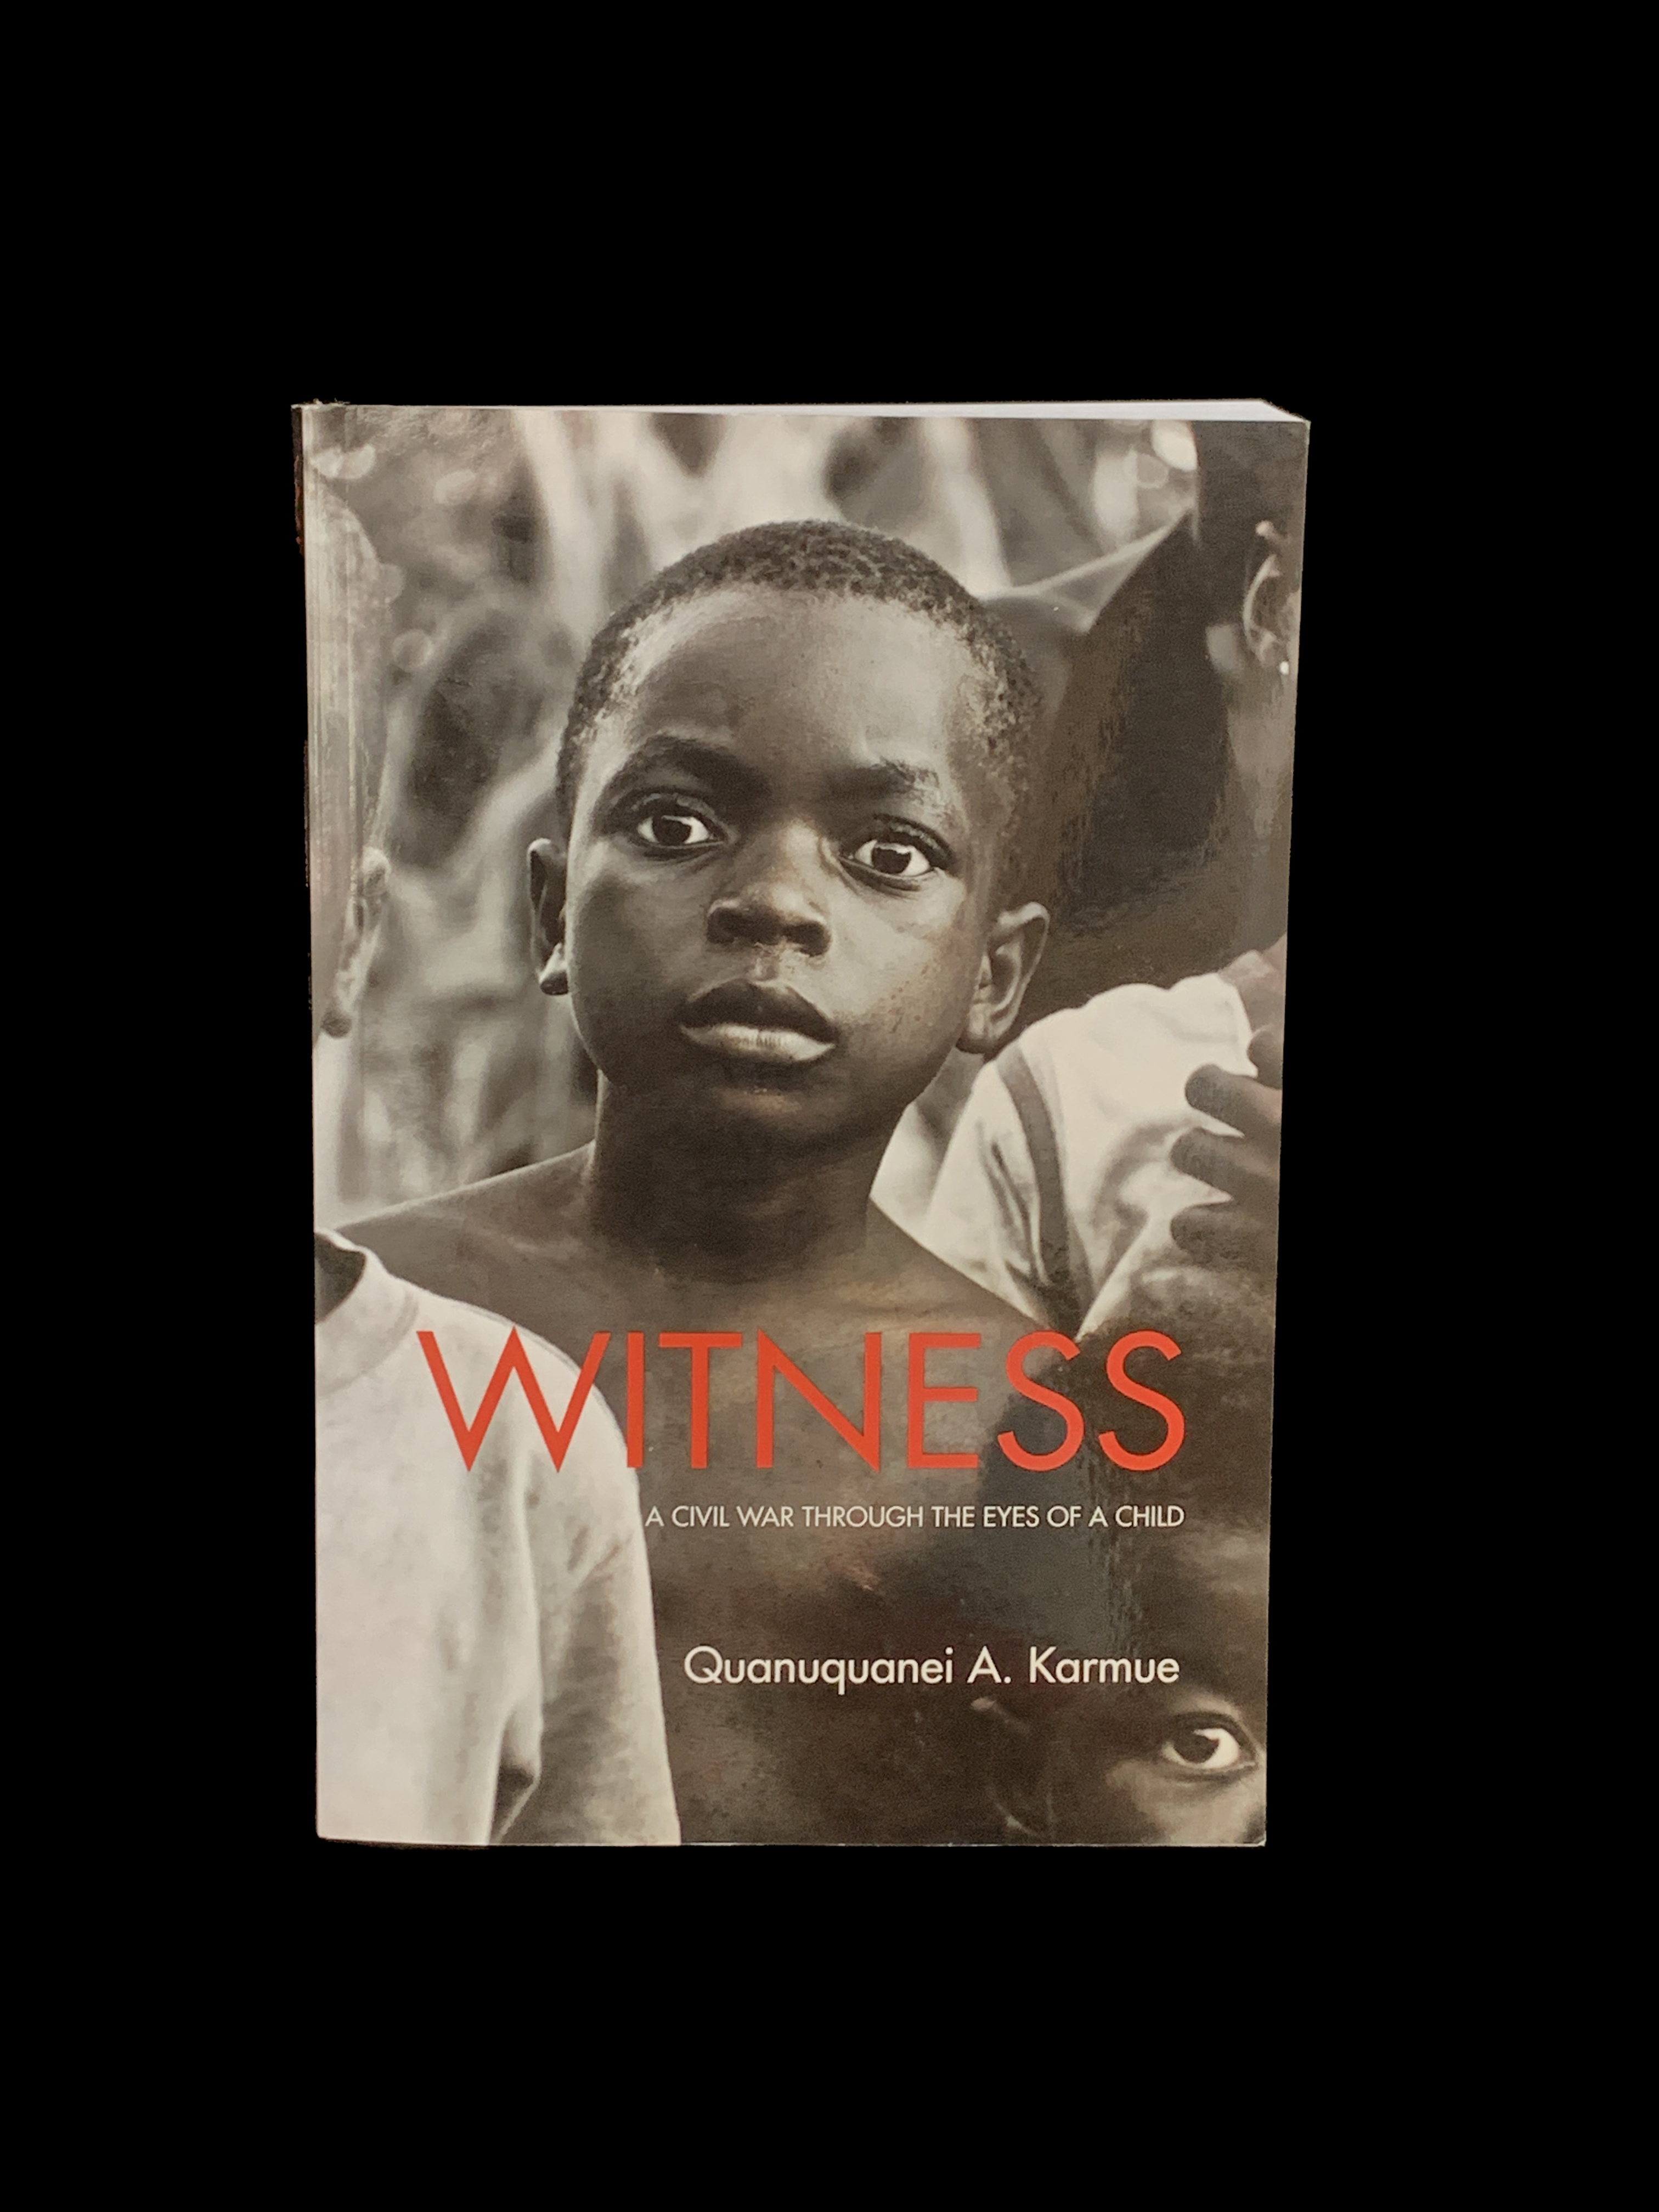 Witness - A Civil War Through The Eyes of a Child by Quanuquanei A. Karmue